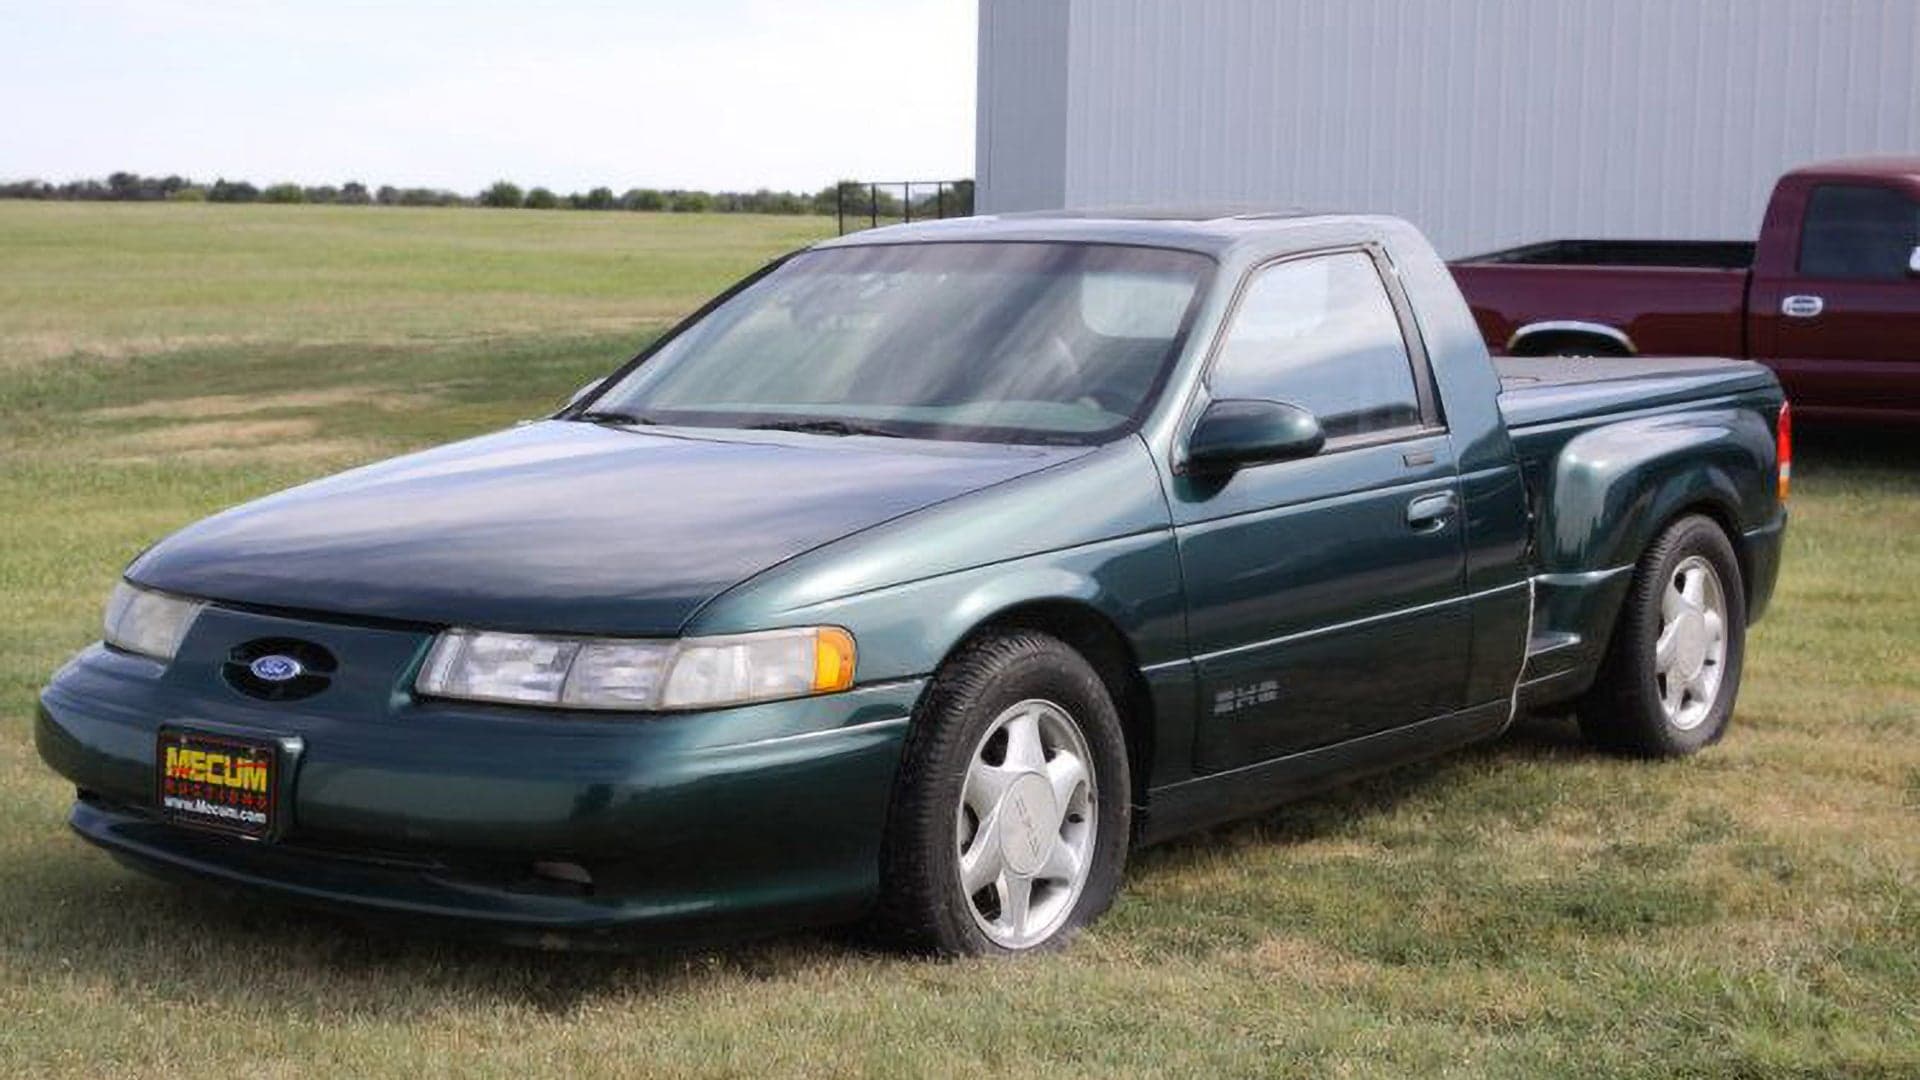 One-Off 1994 Ford Taurus SHO Pickup Conversion Is an Oddball Bargain at $7,500